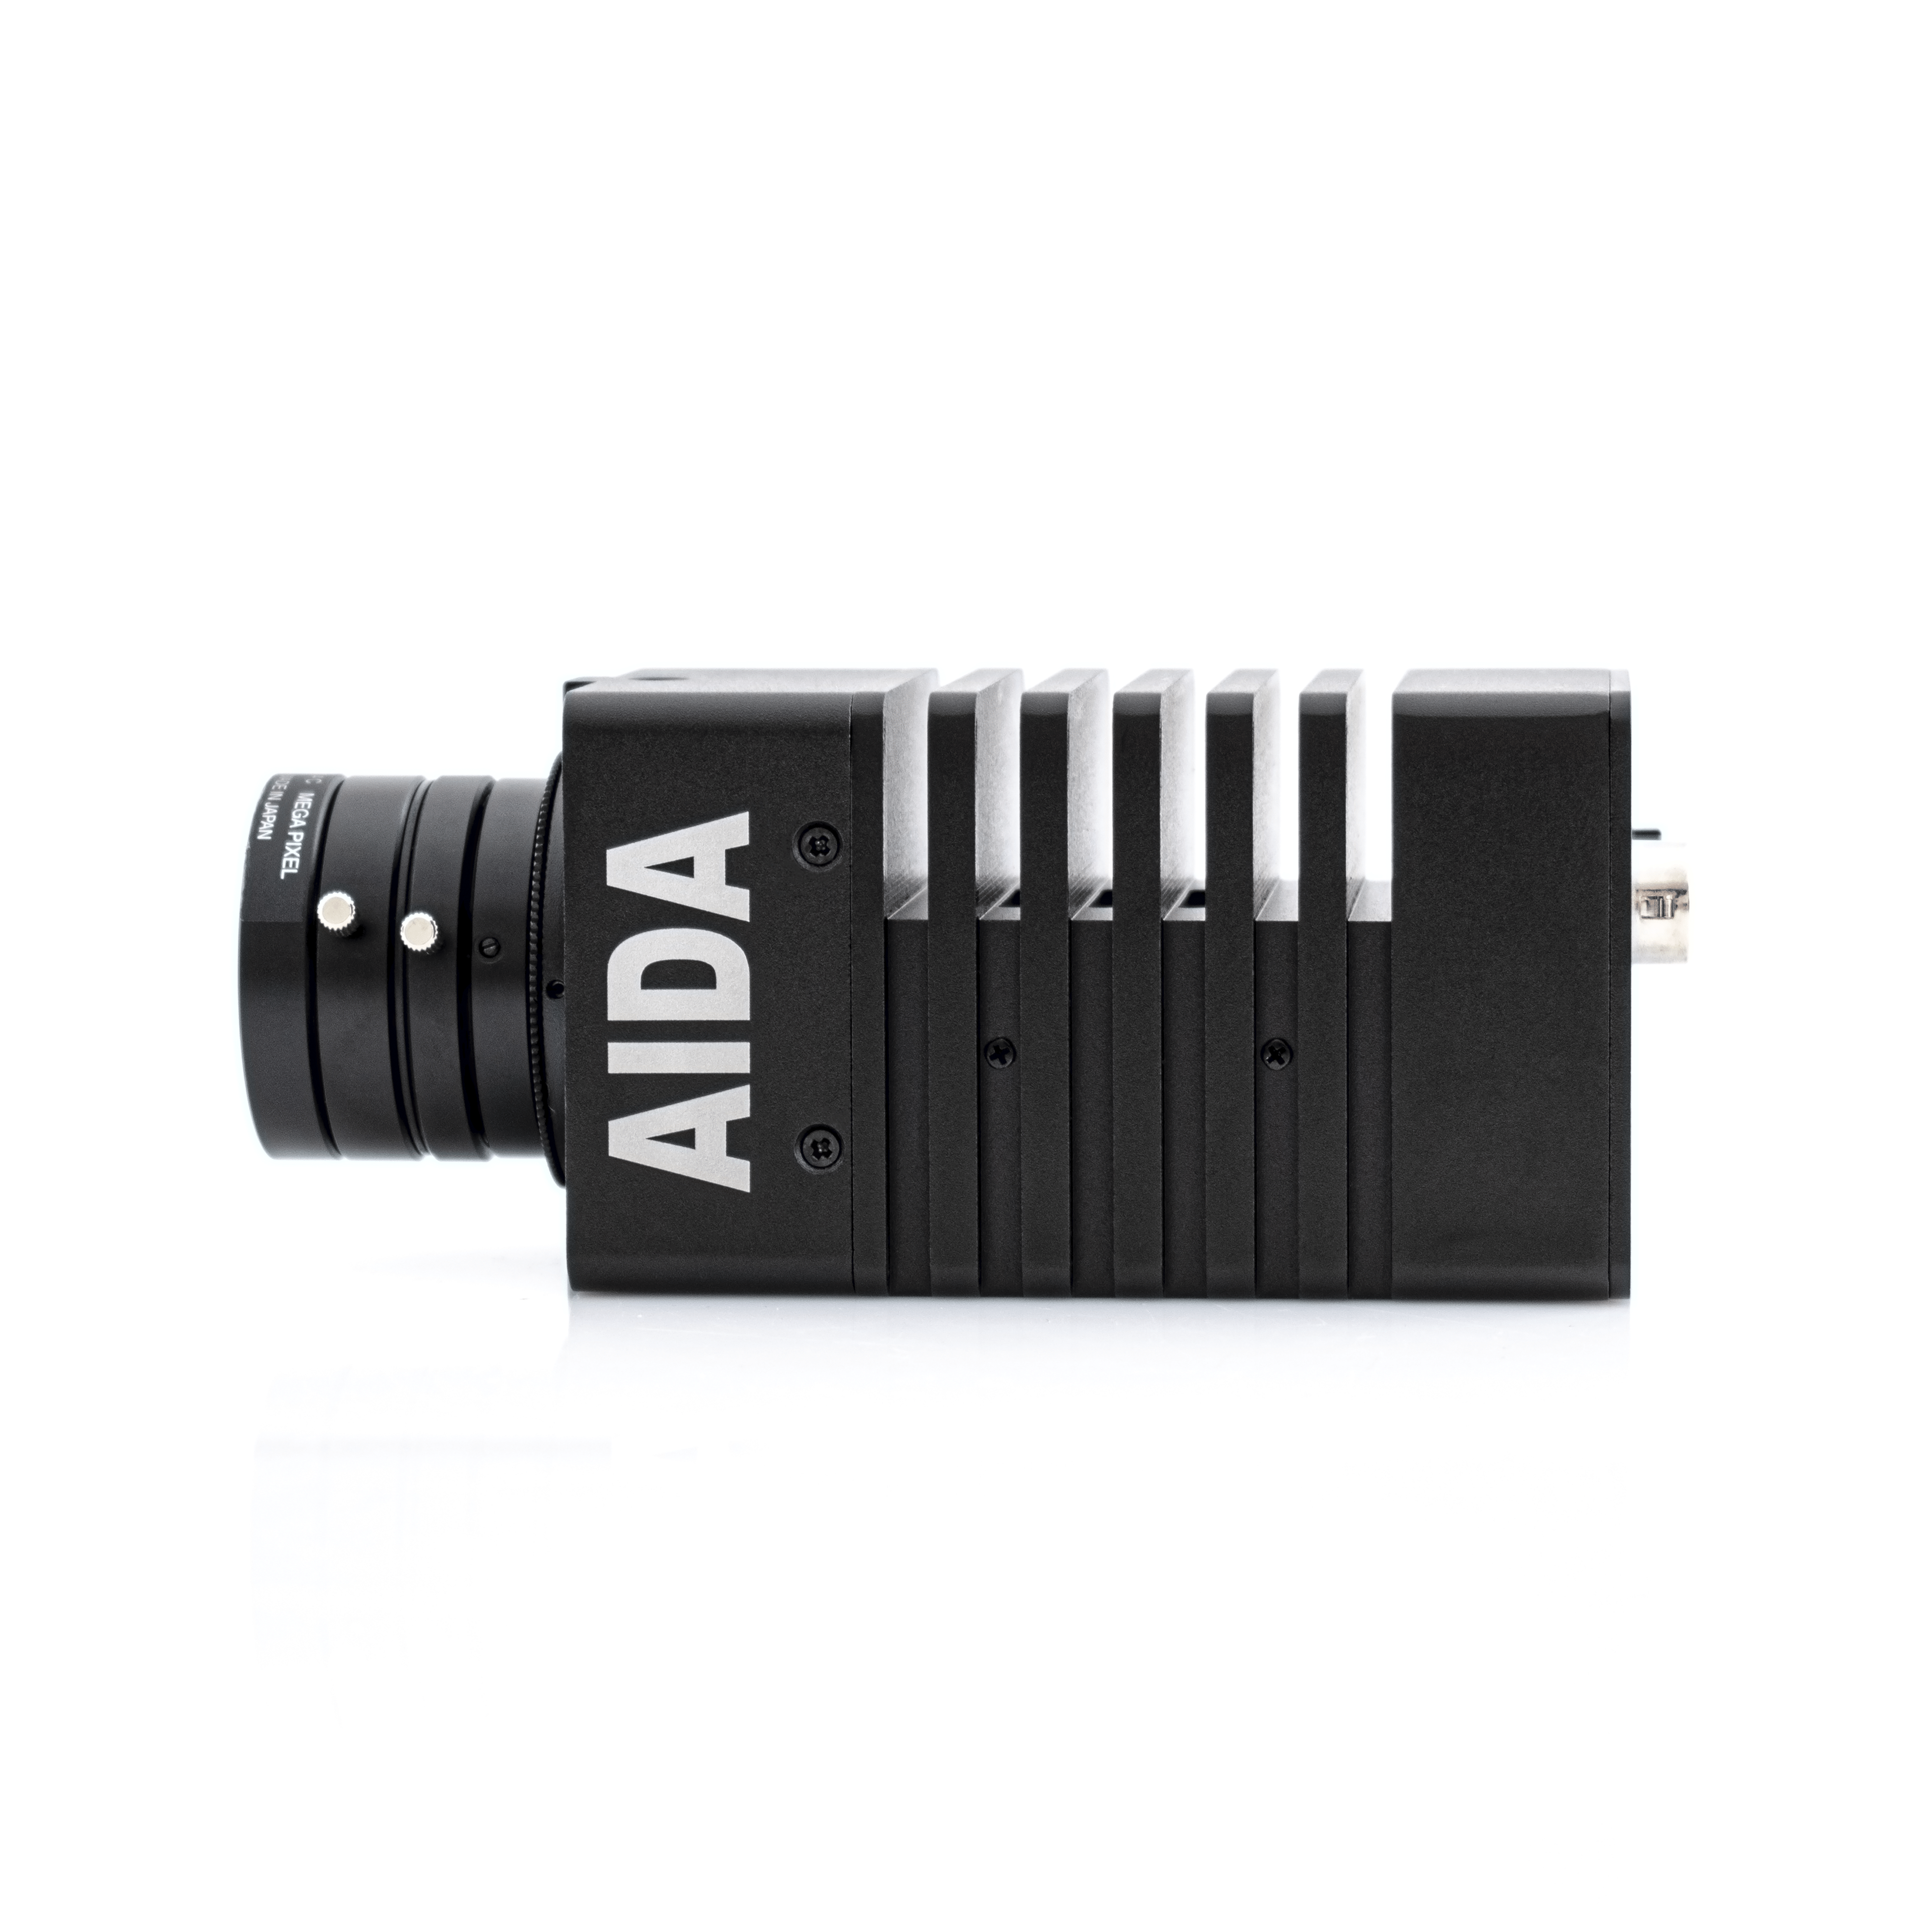 AIDA Imaging UHD-200 4K 60p POV Camera with Varifocal Lens in a Side View